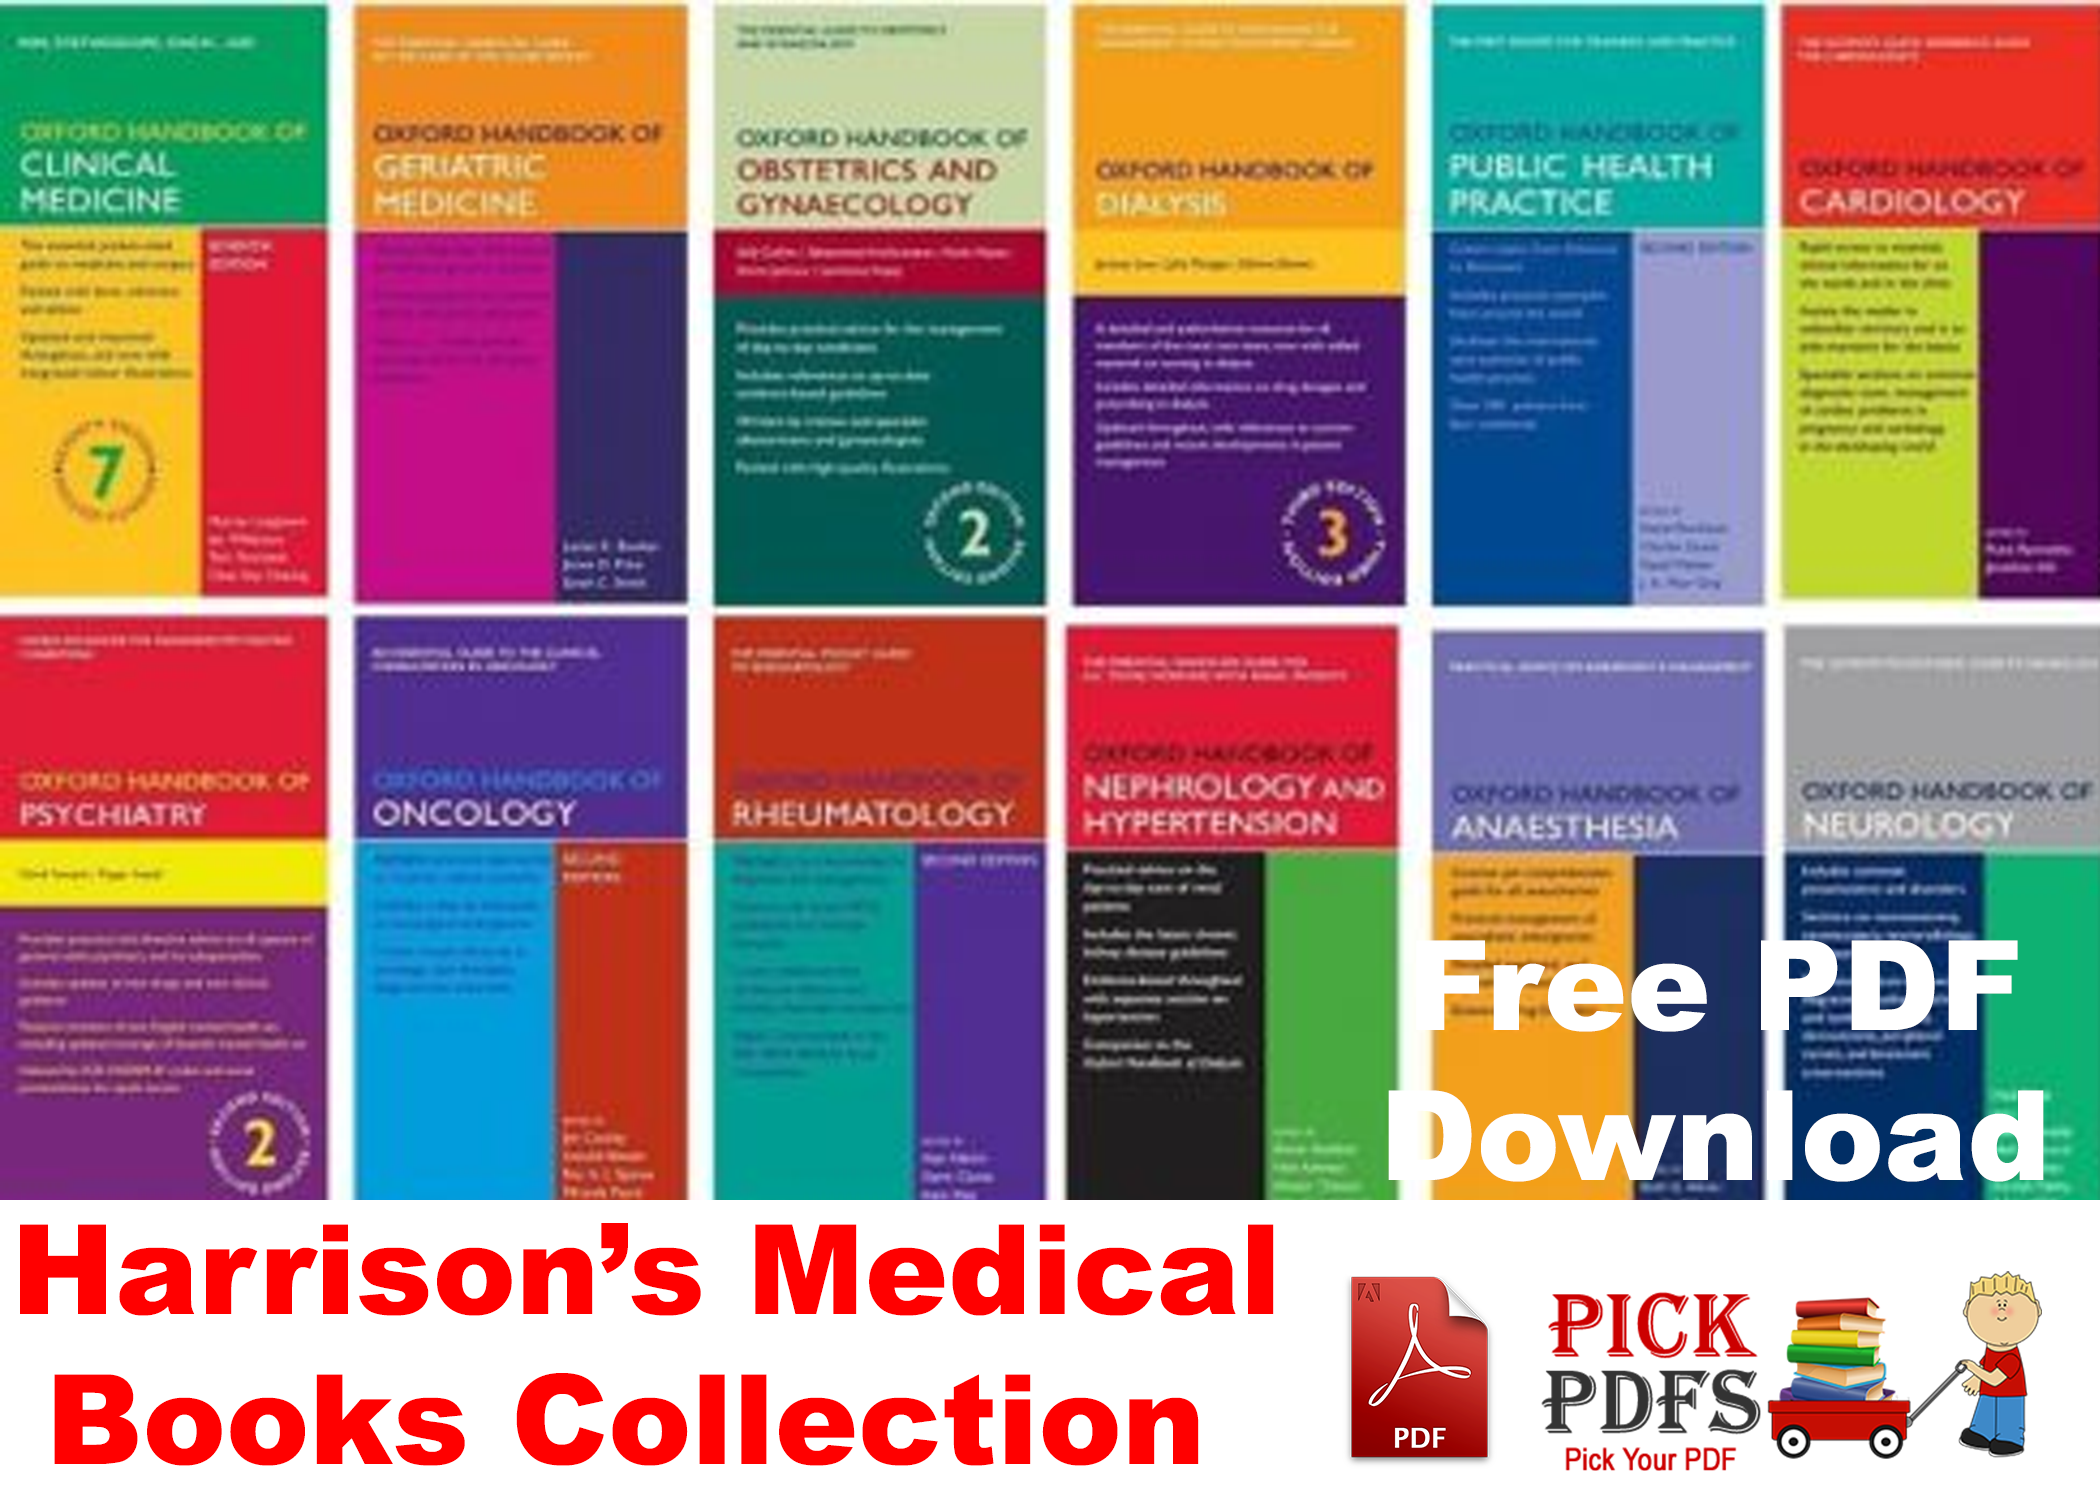 https://pickpdfs.com/harrisons-medical-books-collection-download-free-direct-link/